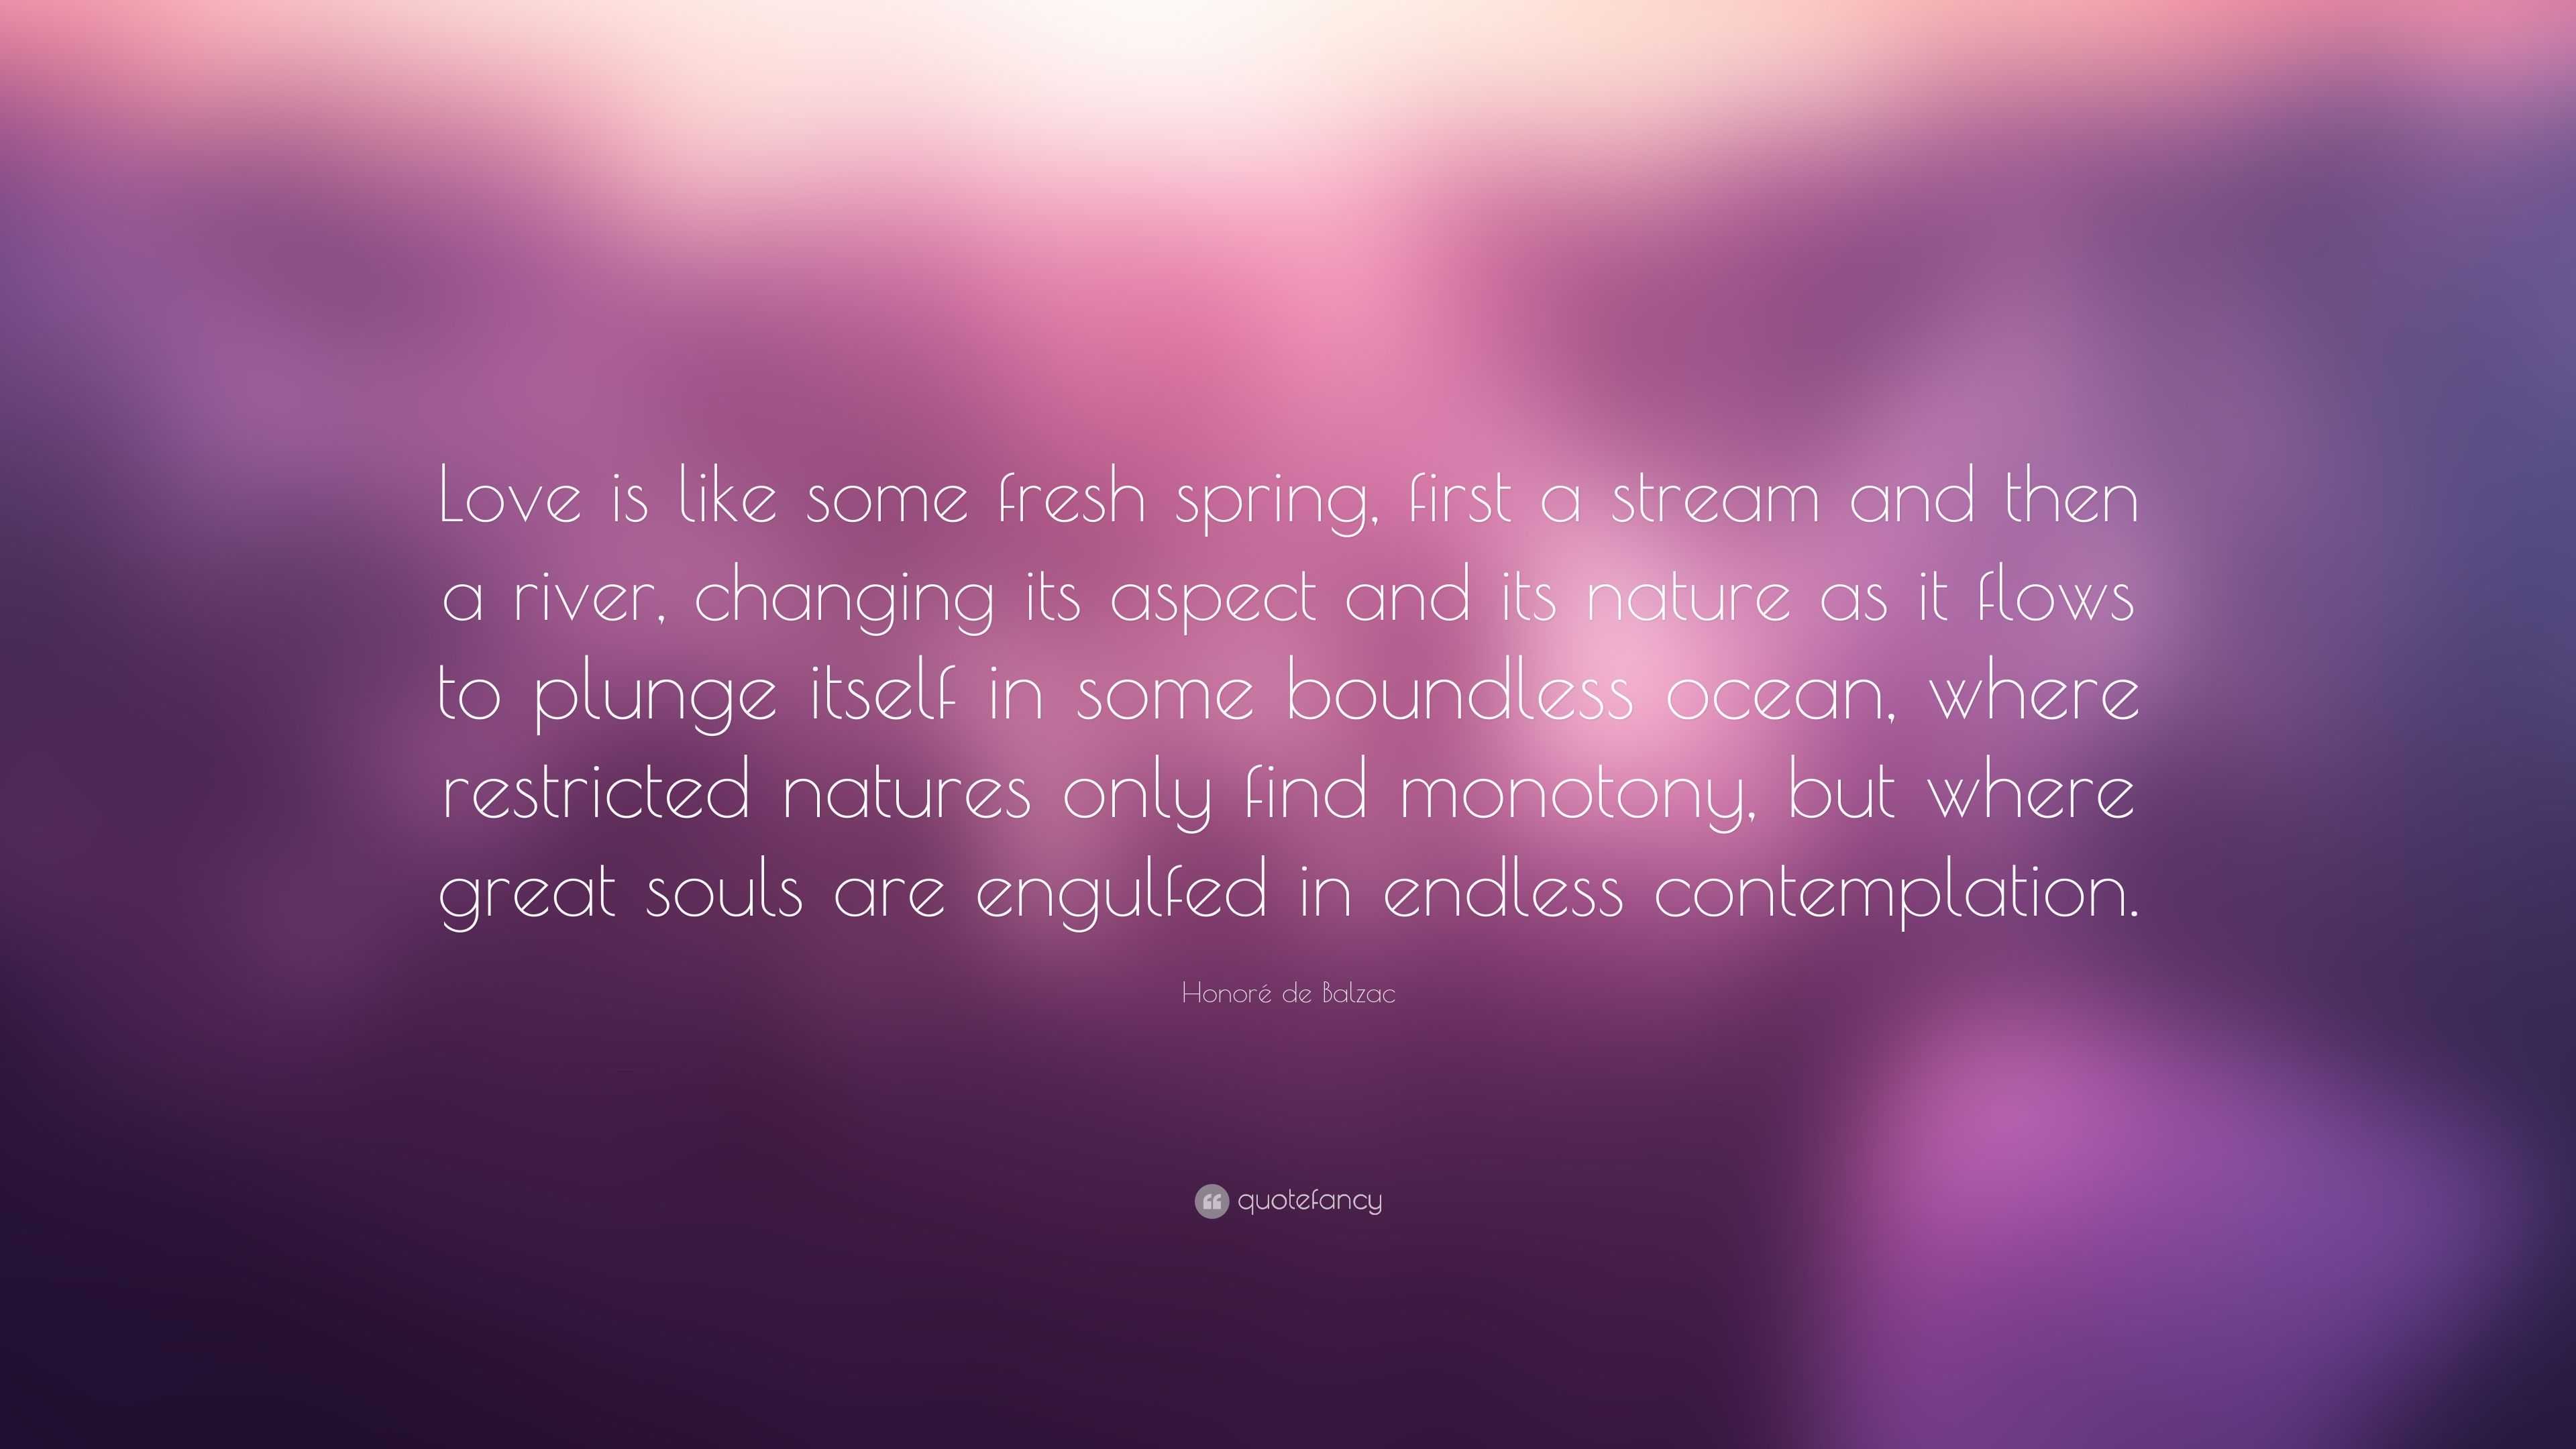 Honoré de Balzac Quote “Love is like some fresh spring first a stream